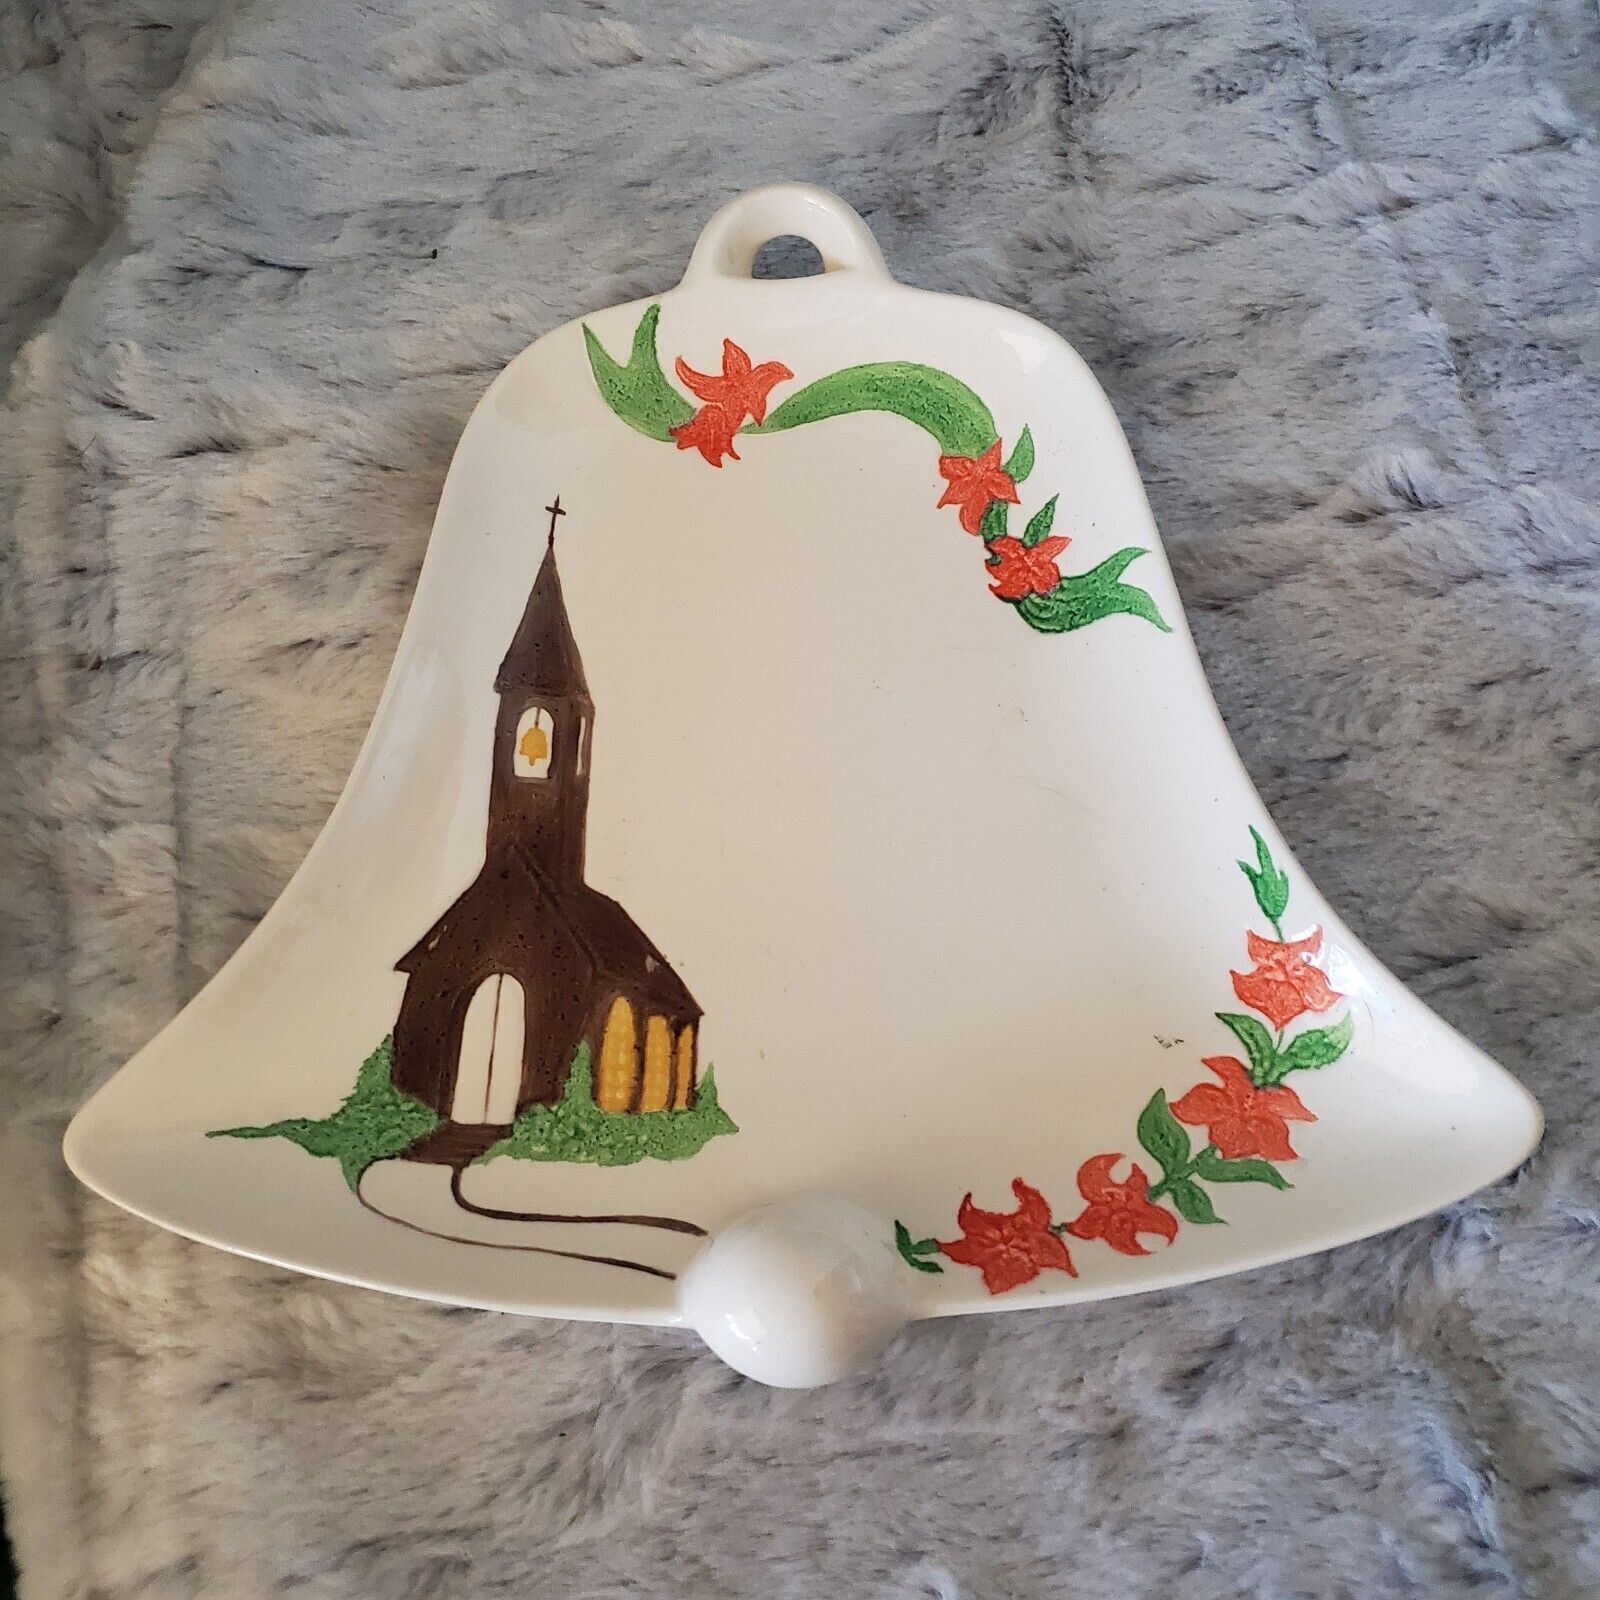 Handpainted Christmas Bell Holiday Serving Dish Candy Dish Nut Tray Poinsettia